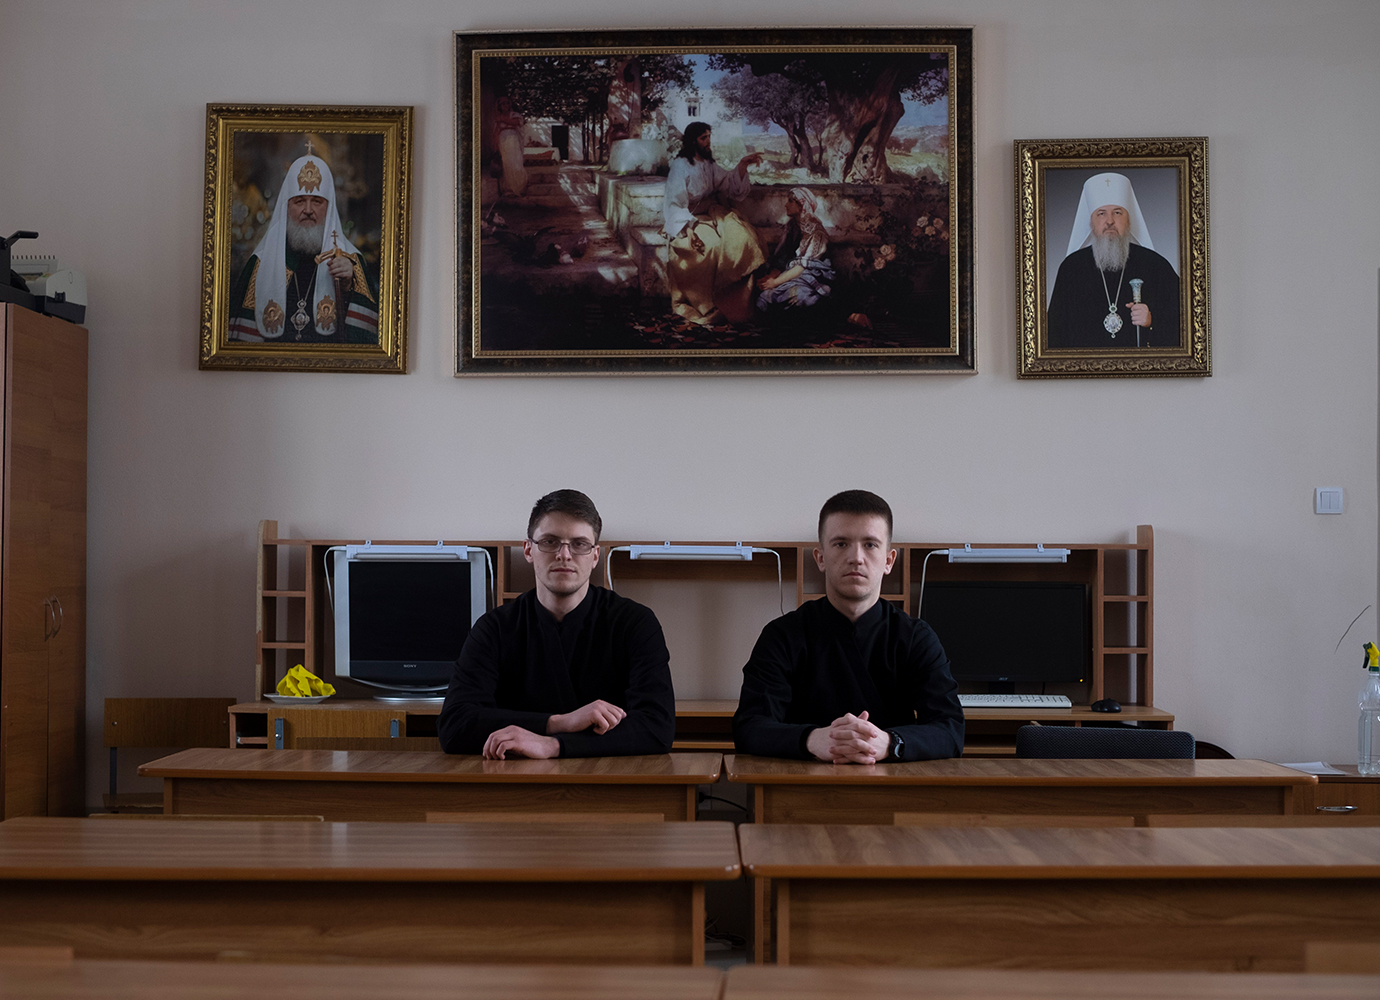 Liminal souls: exploring the power of choice with Russia’s young priests-in-training